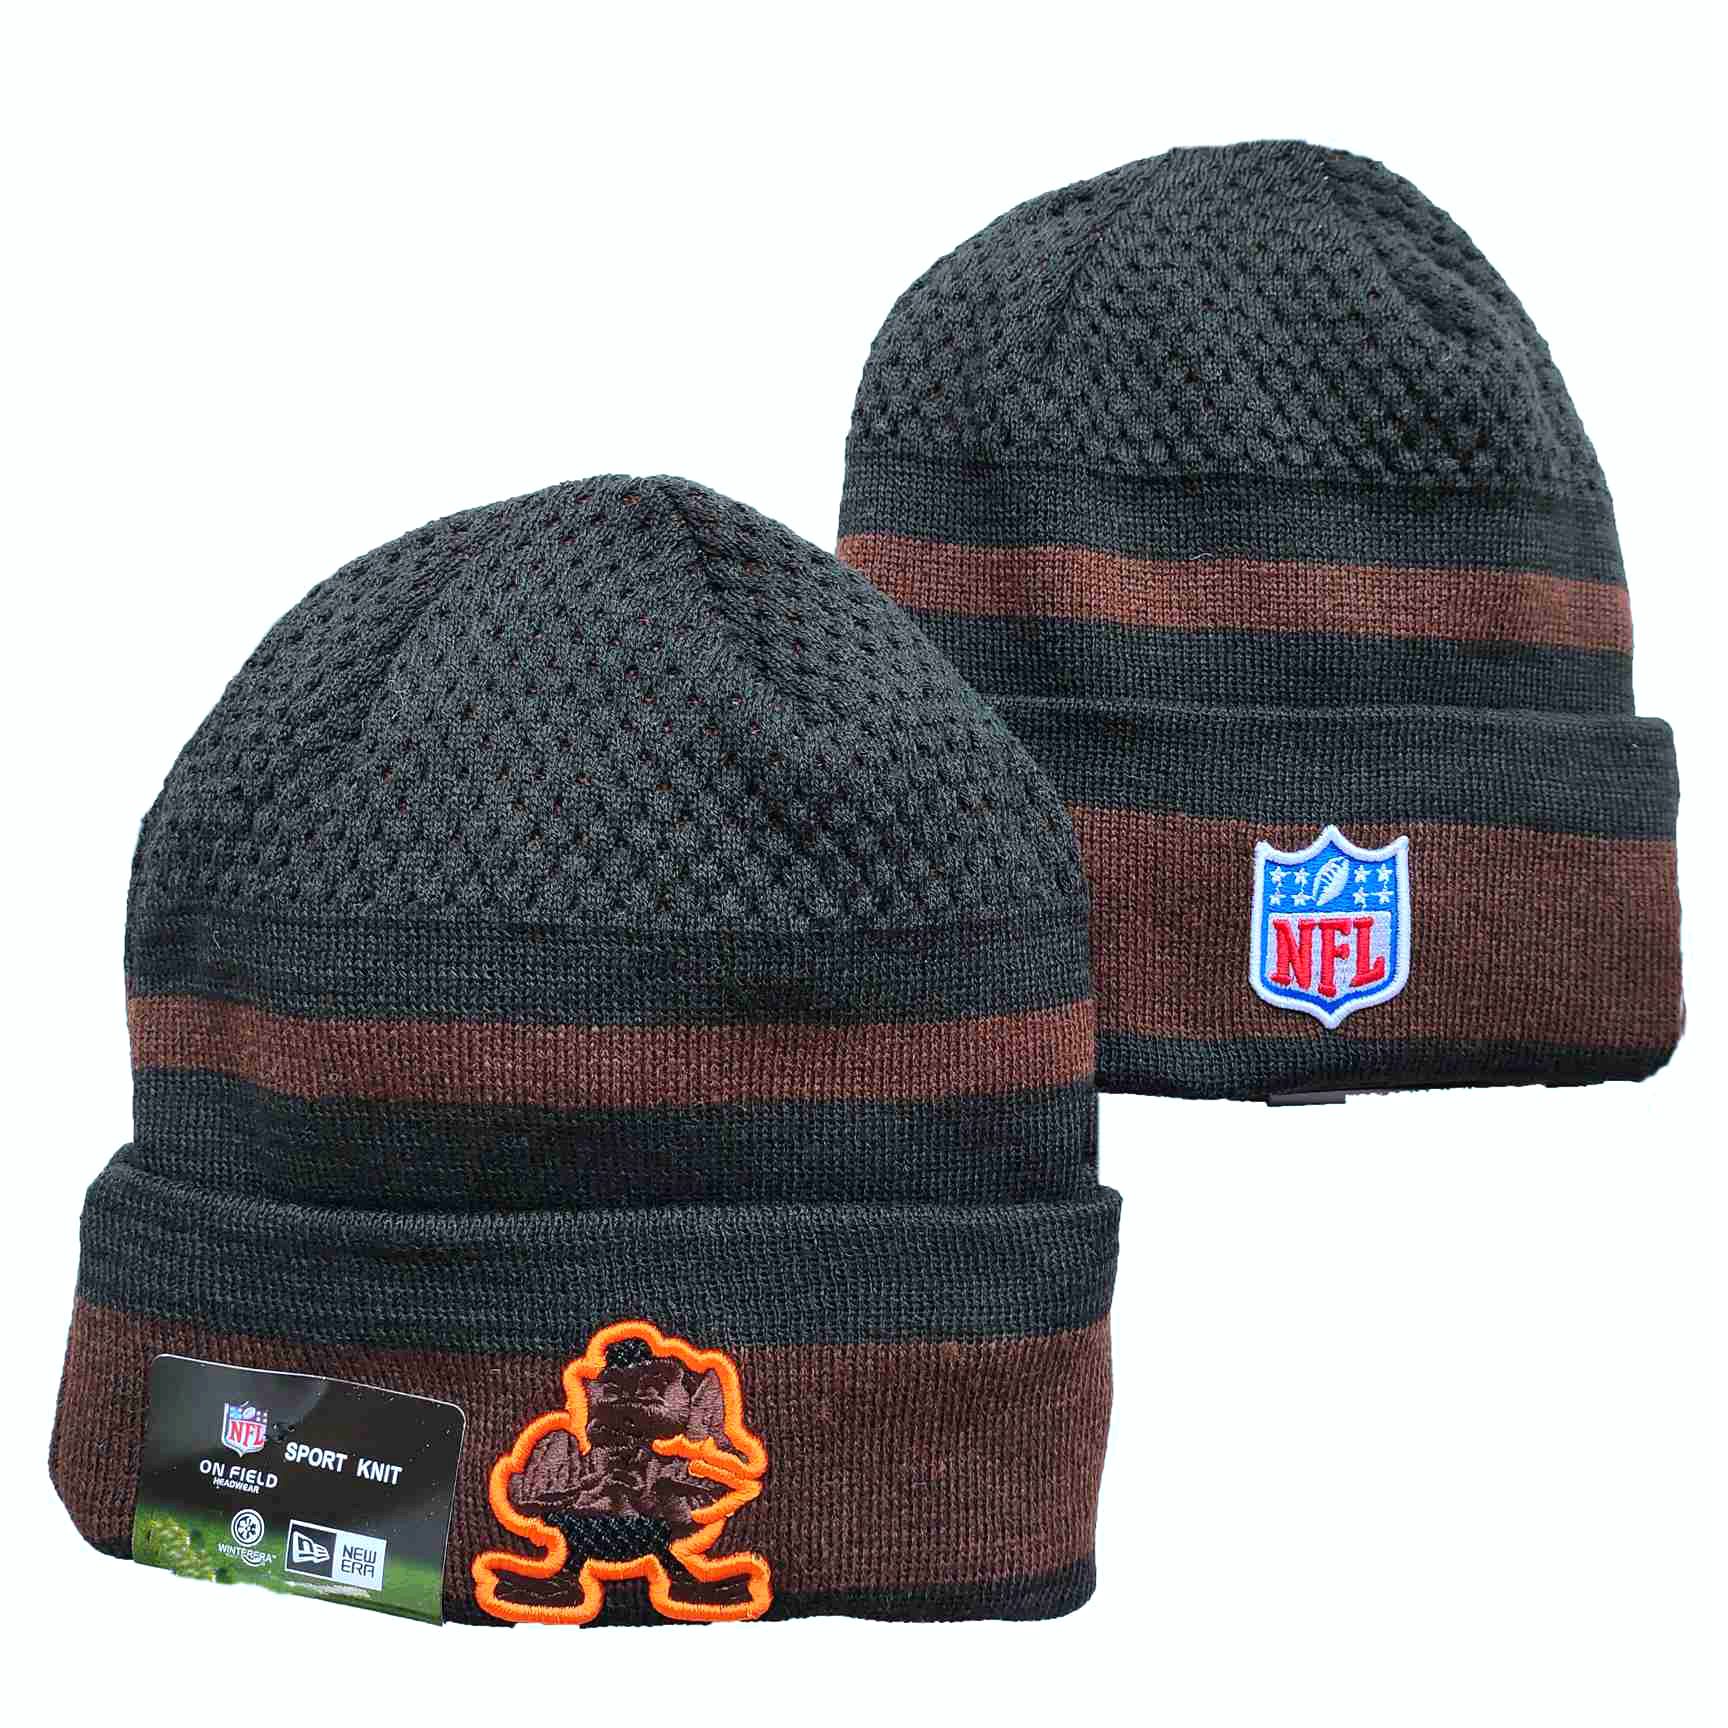 NFL Cleveland Browns Beanies Knit Hats-YD1296